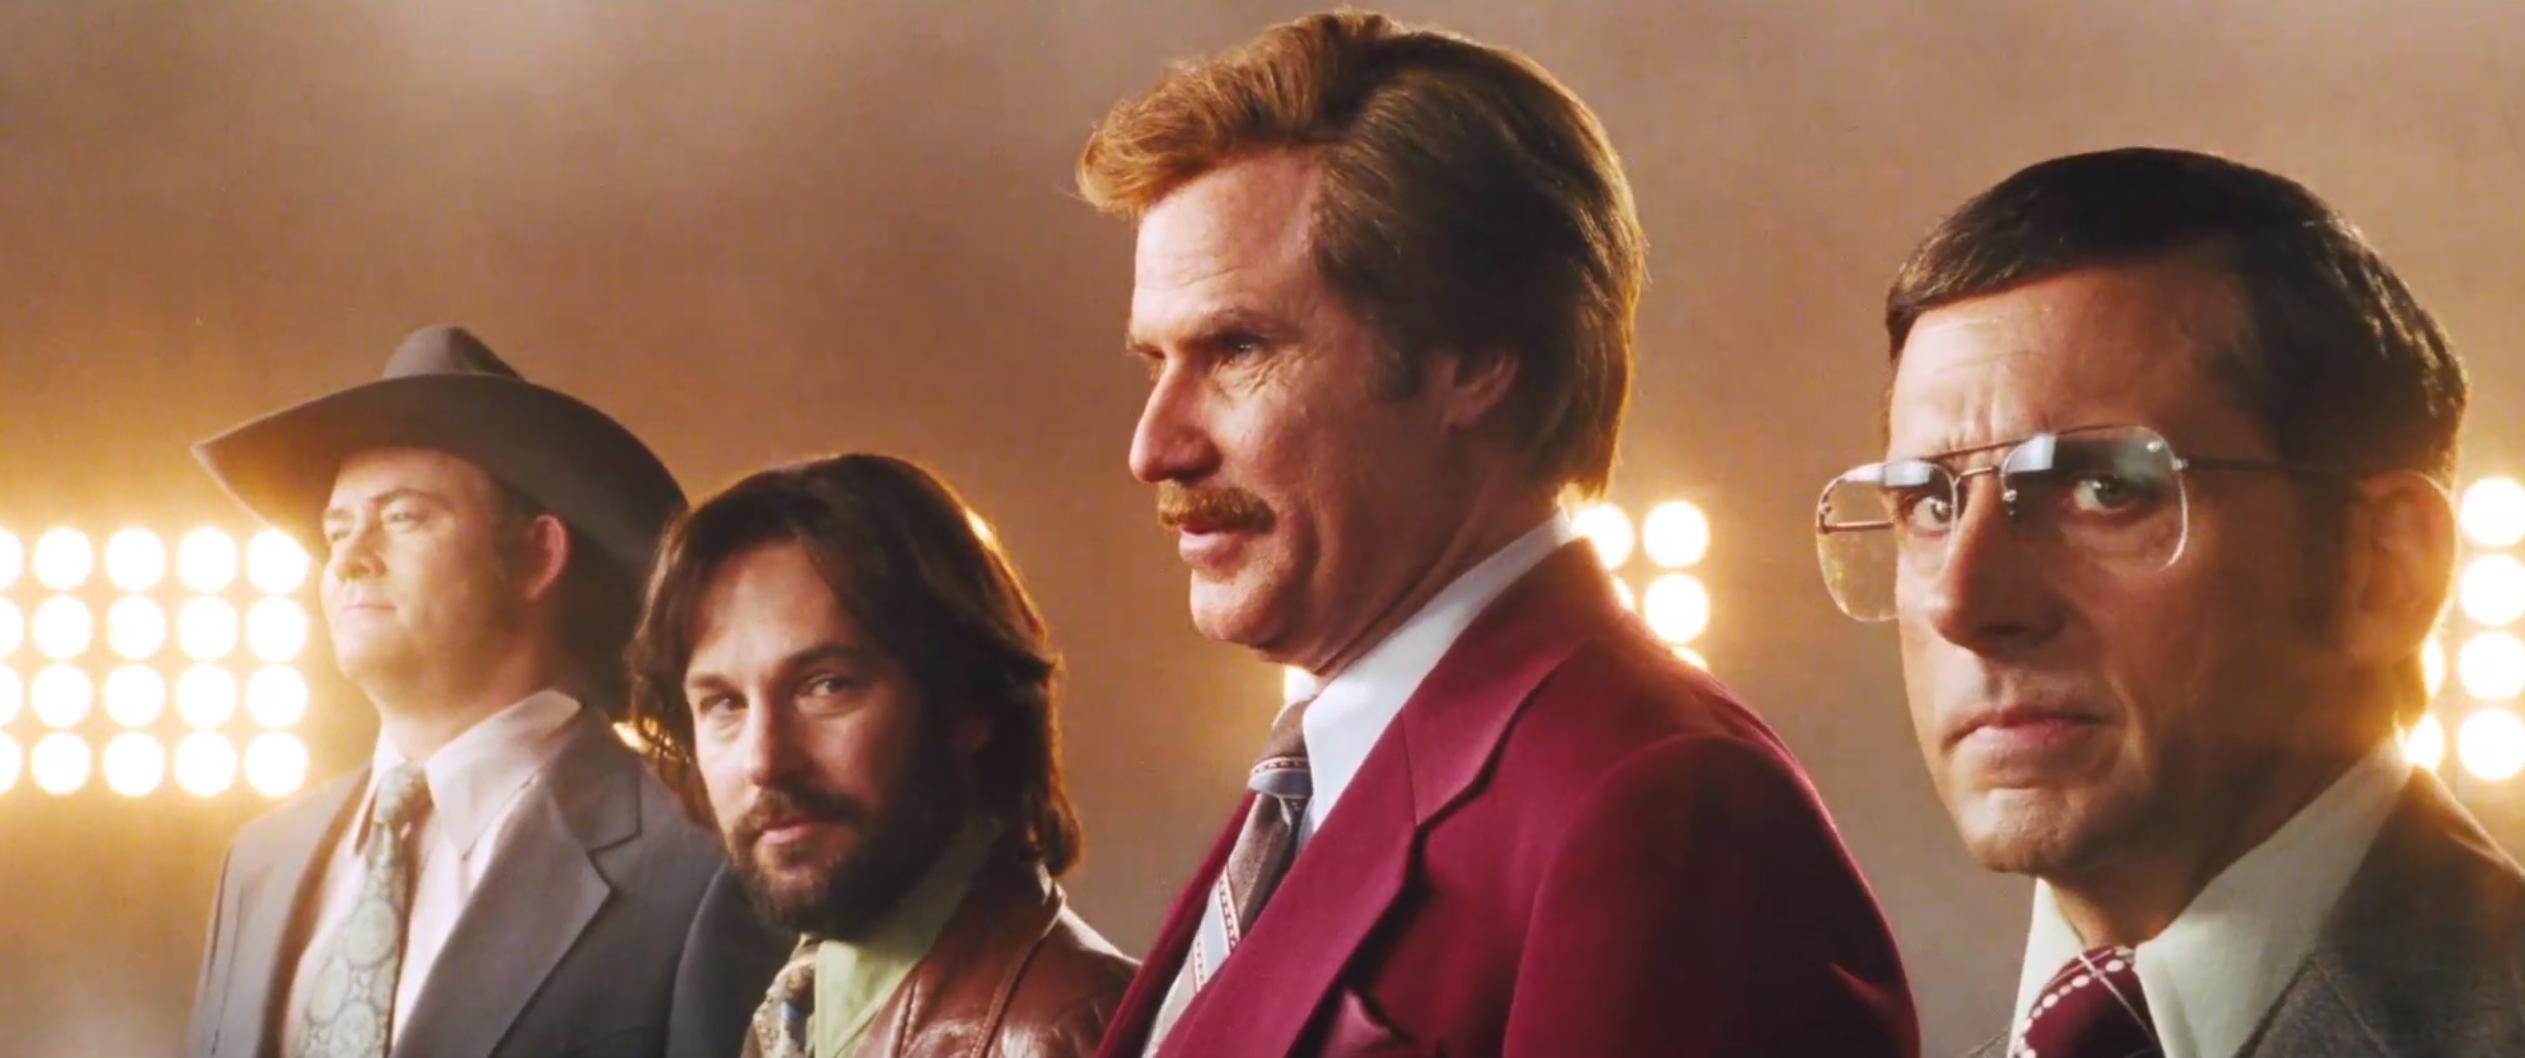 image For > Anchorman Wallpaper